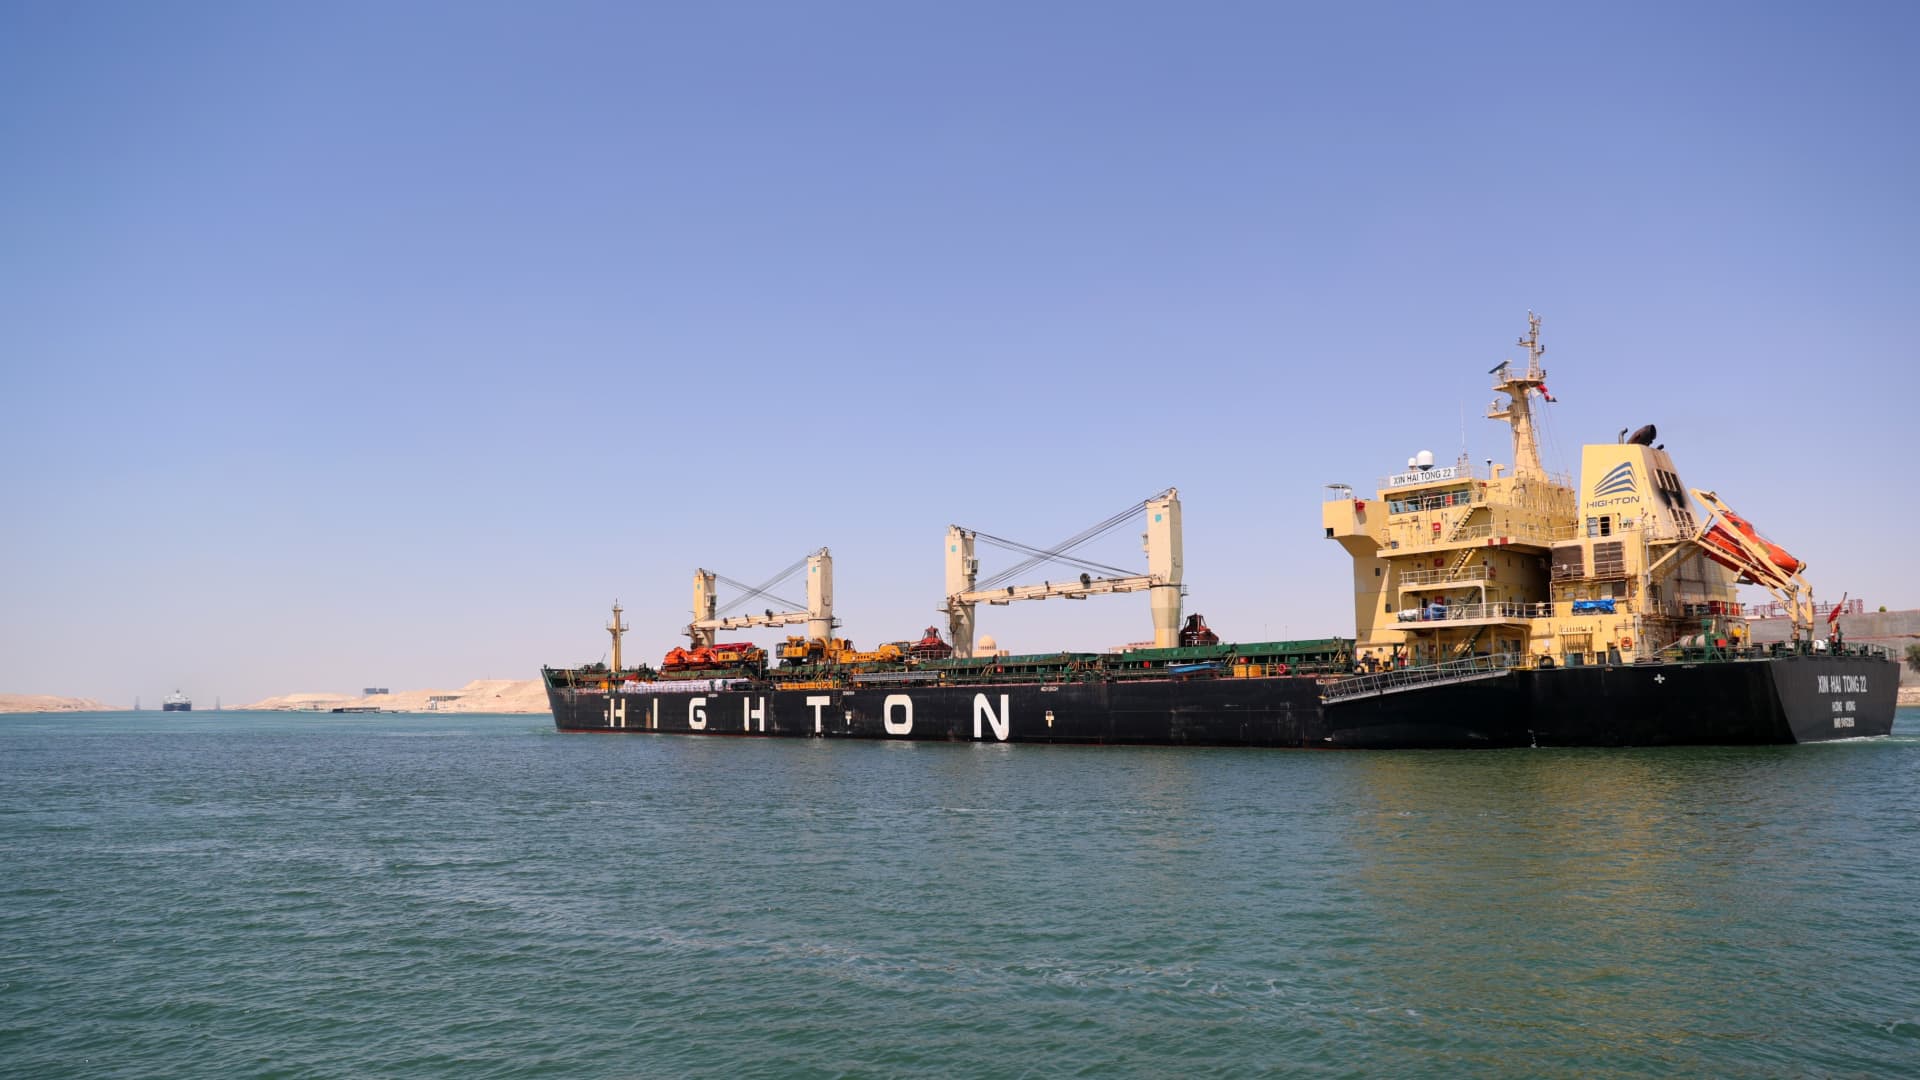 Egypt’s Suez Canal to increase transit fees by 15% in 2023